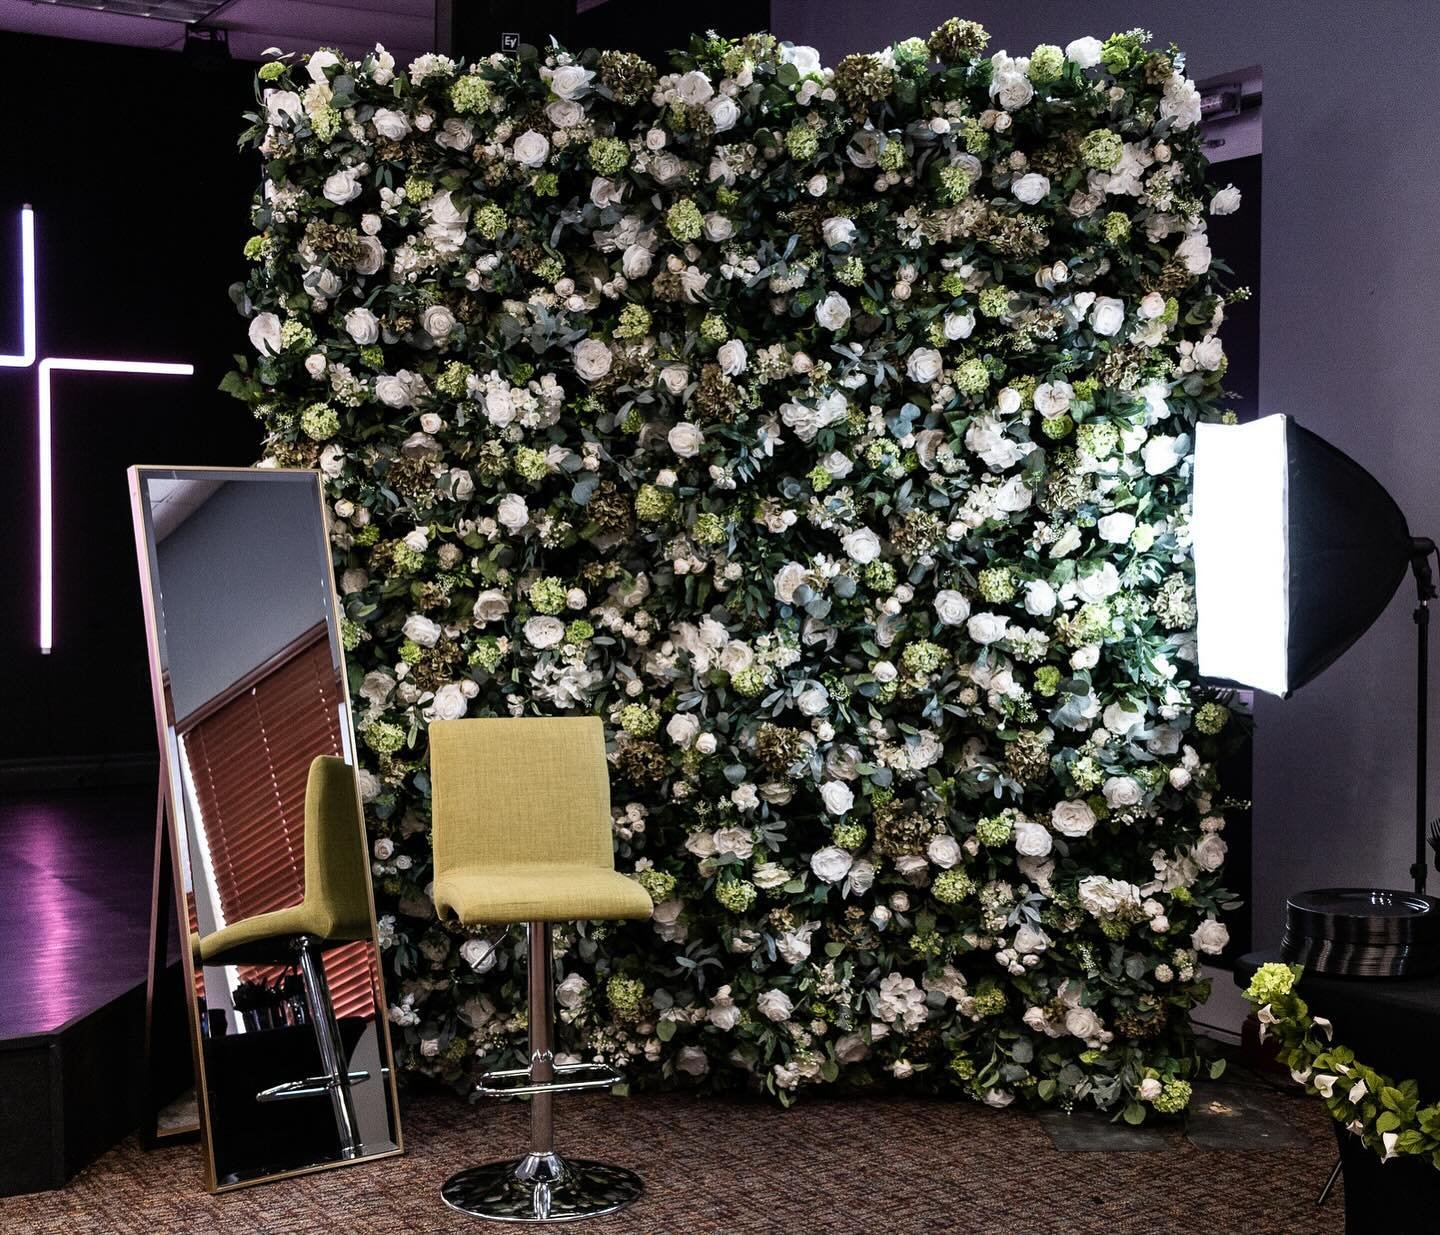 We have over a dozen Flower Wall rental options for this Mother&rsquo;s Day!  Message us today! 
.
.
.
#miamiflowerwalls #browardflowerwalls #miamiflowers #browardflowers #miamiprops